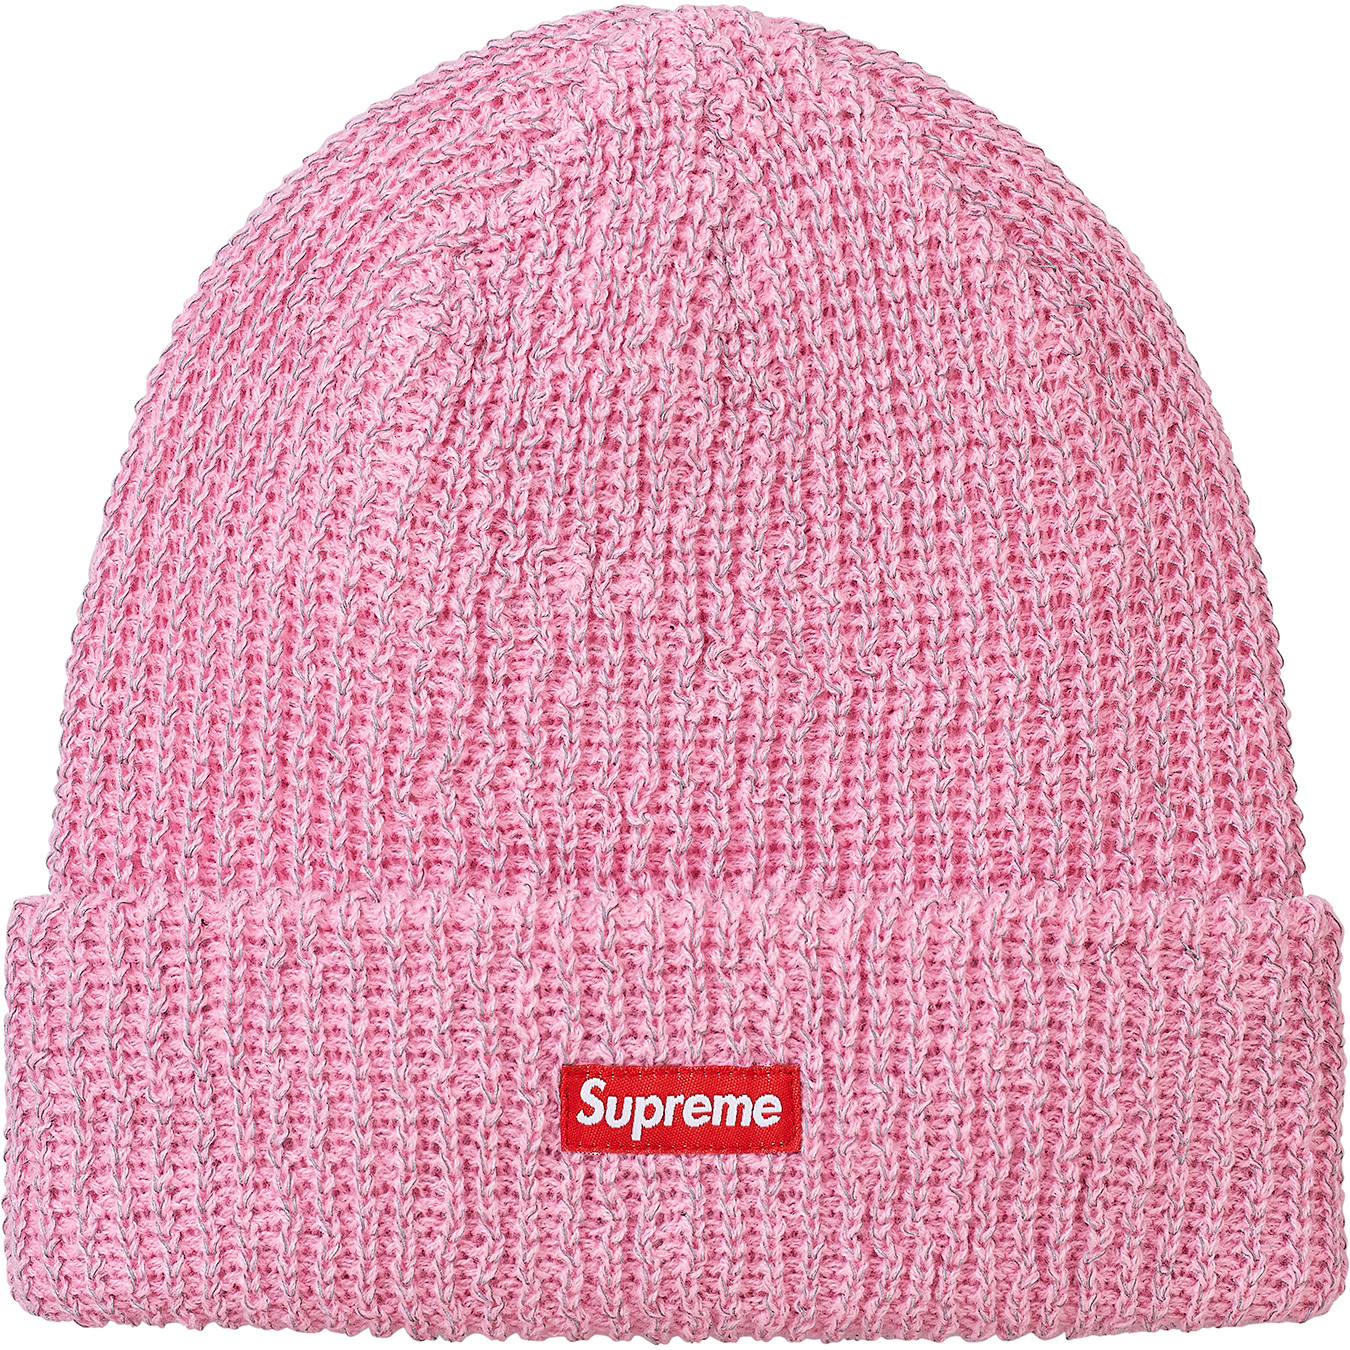 Supreme Reflective Loose Gauge Beanie Red - FW17 - US